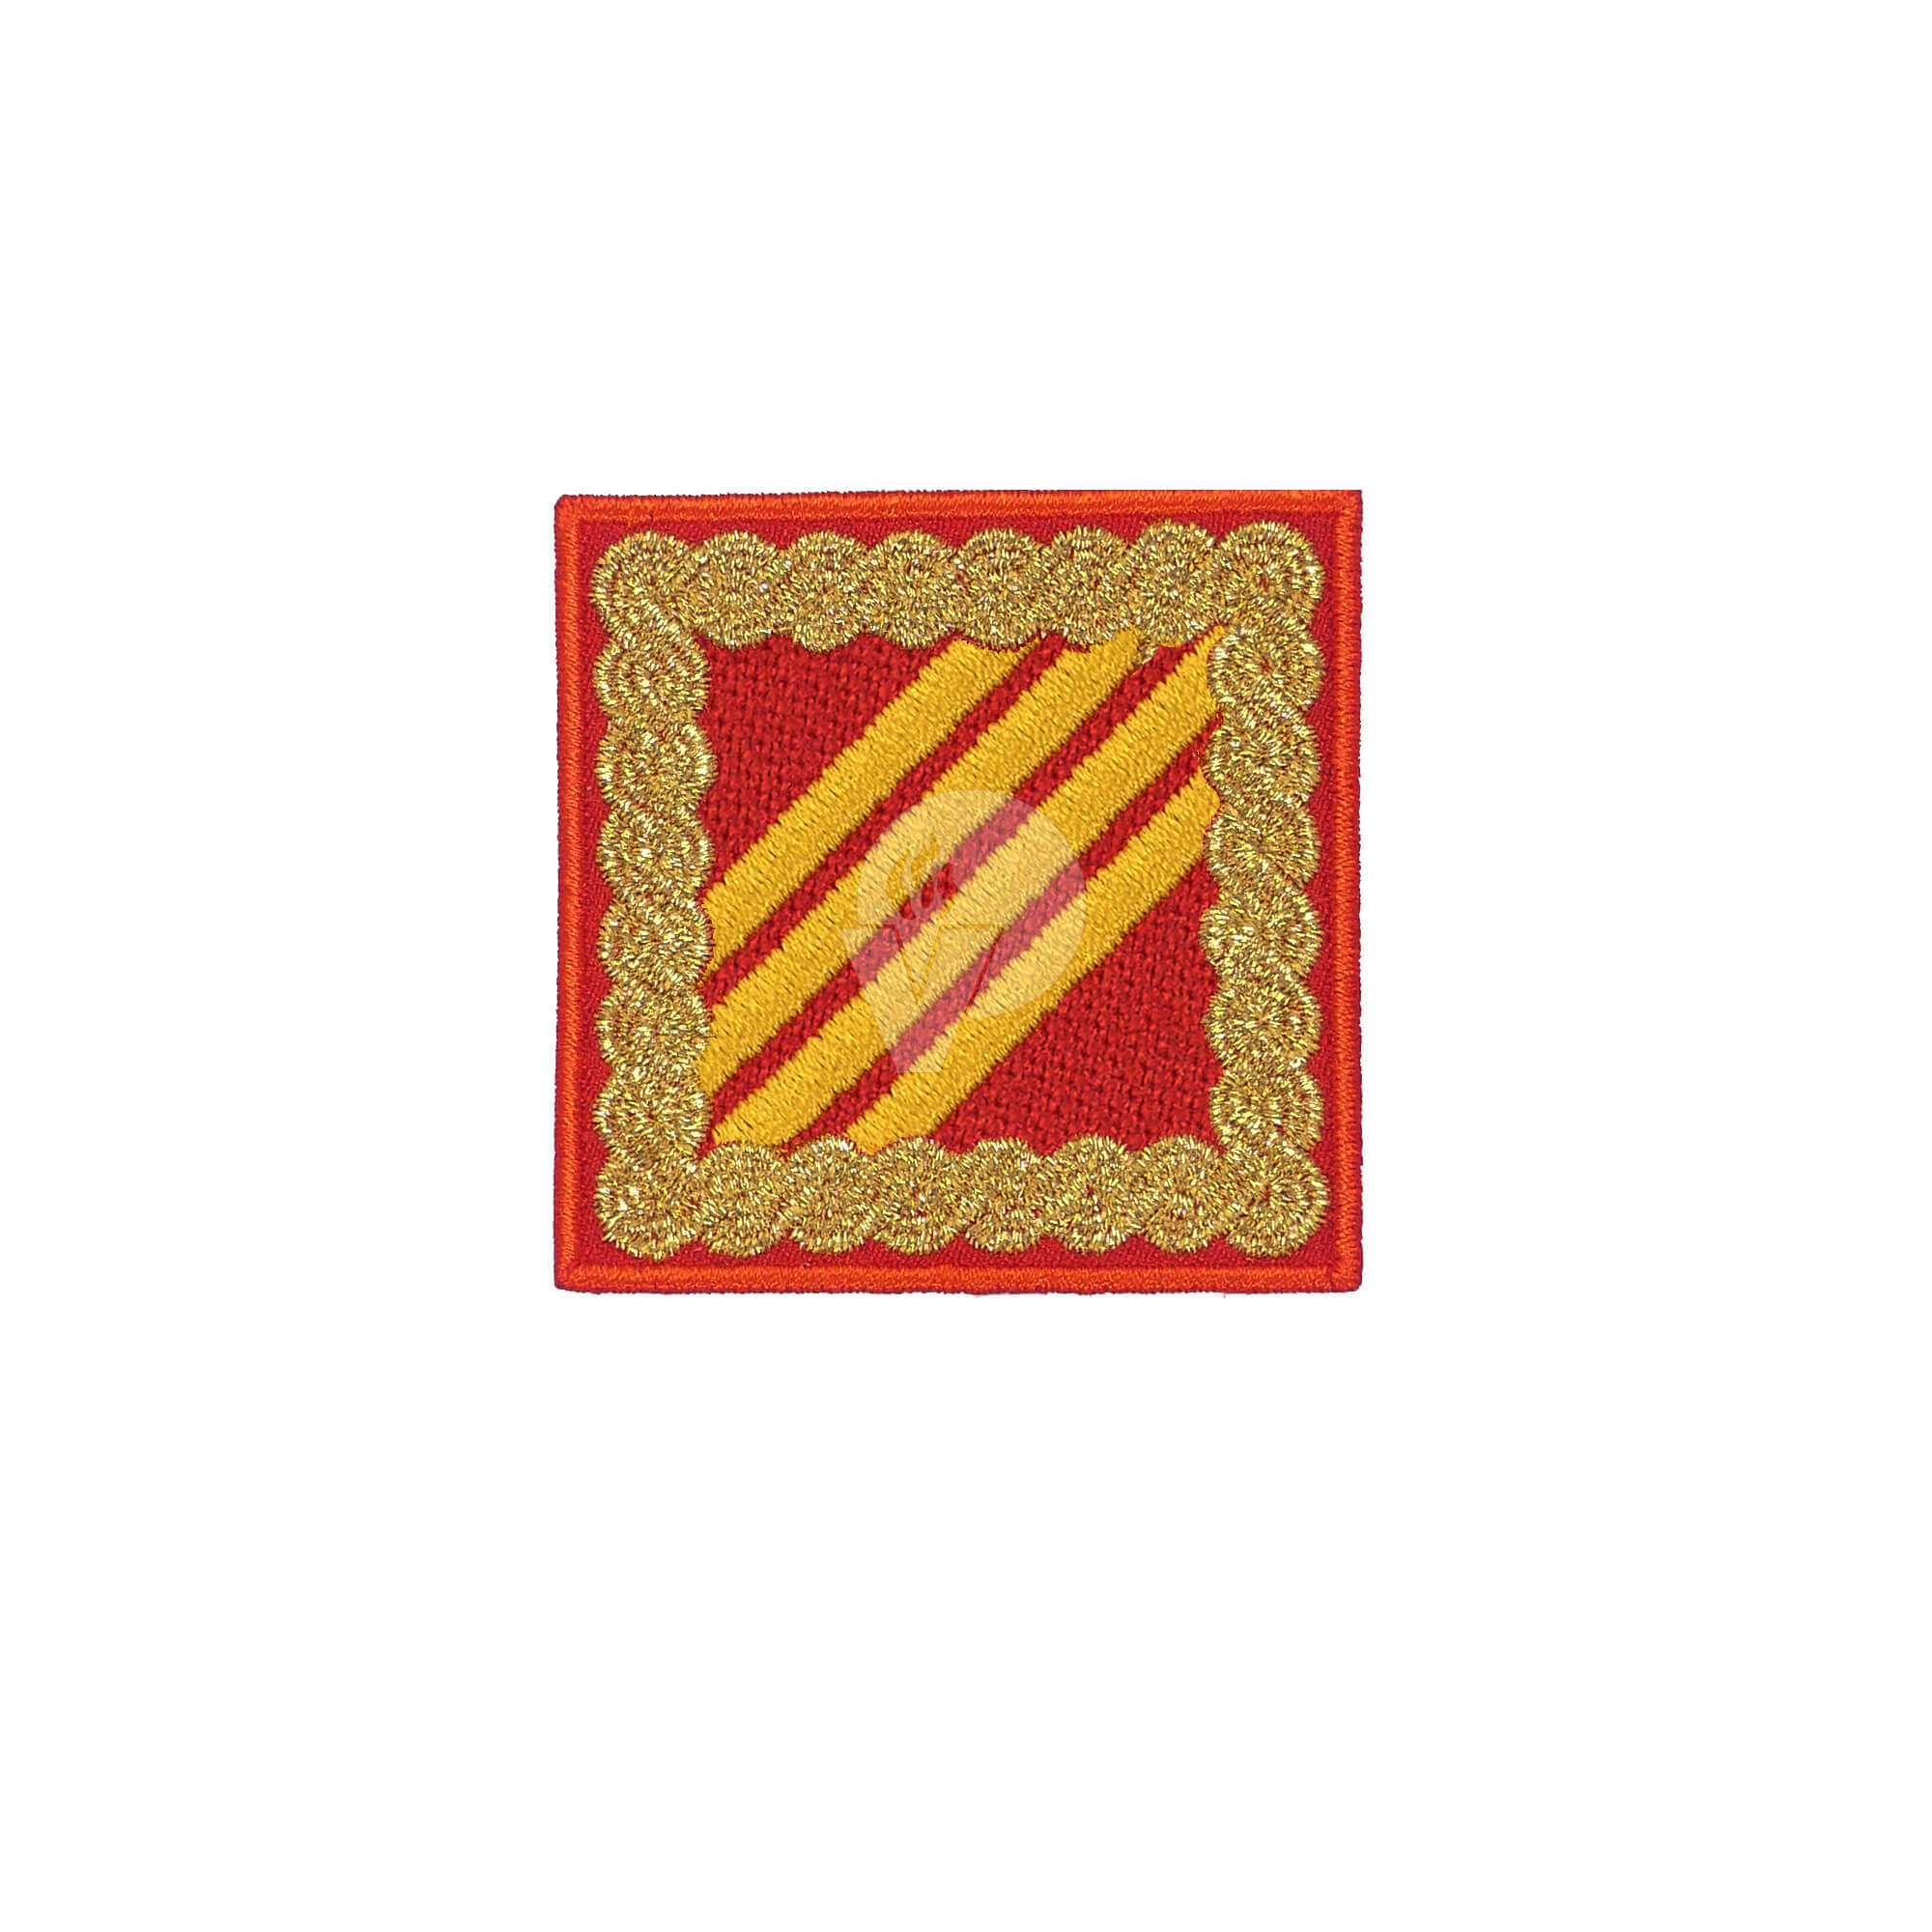 Mark for Professional Firefighter Workplace, Regional Fire Commander